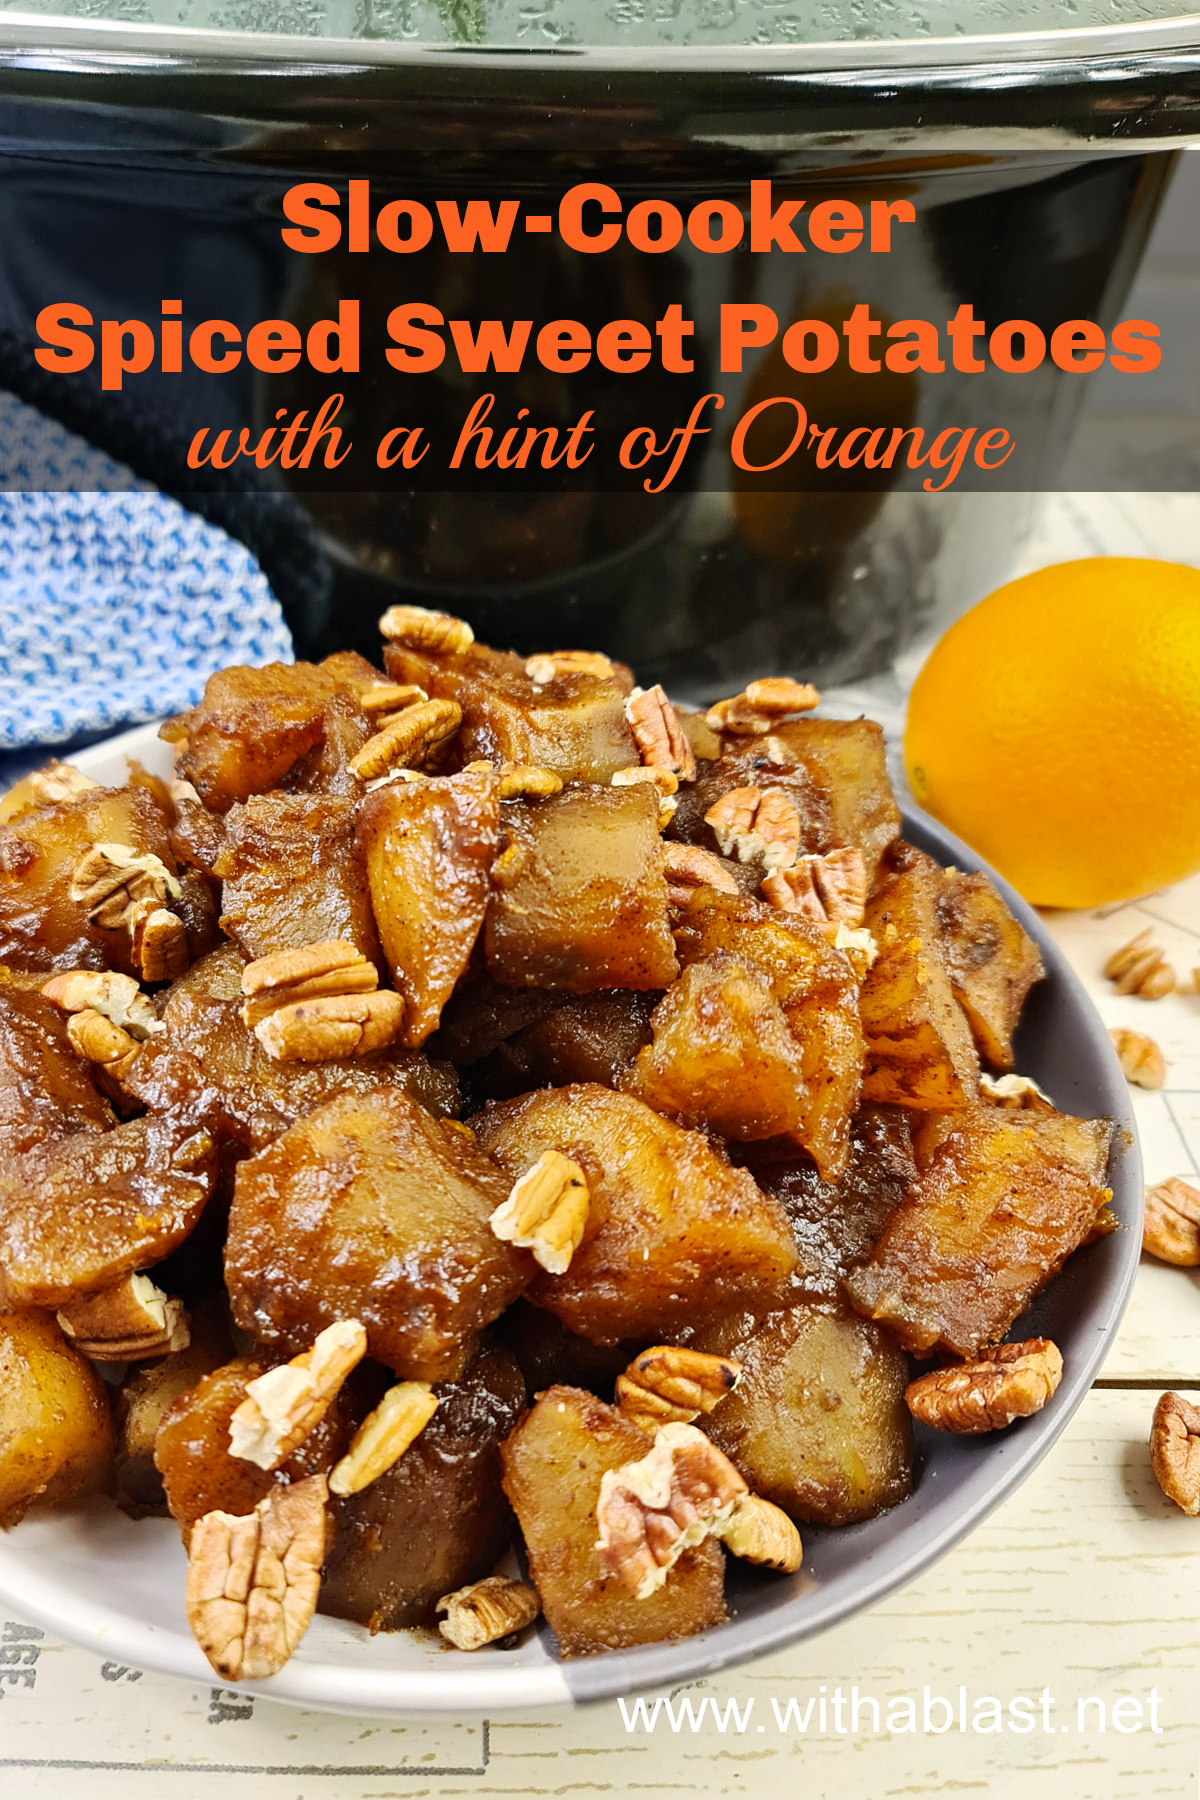 Slow-Cooker Spiced Sweet Potatoes